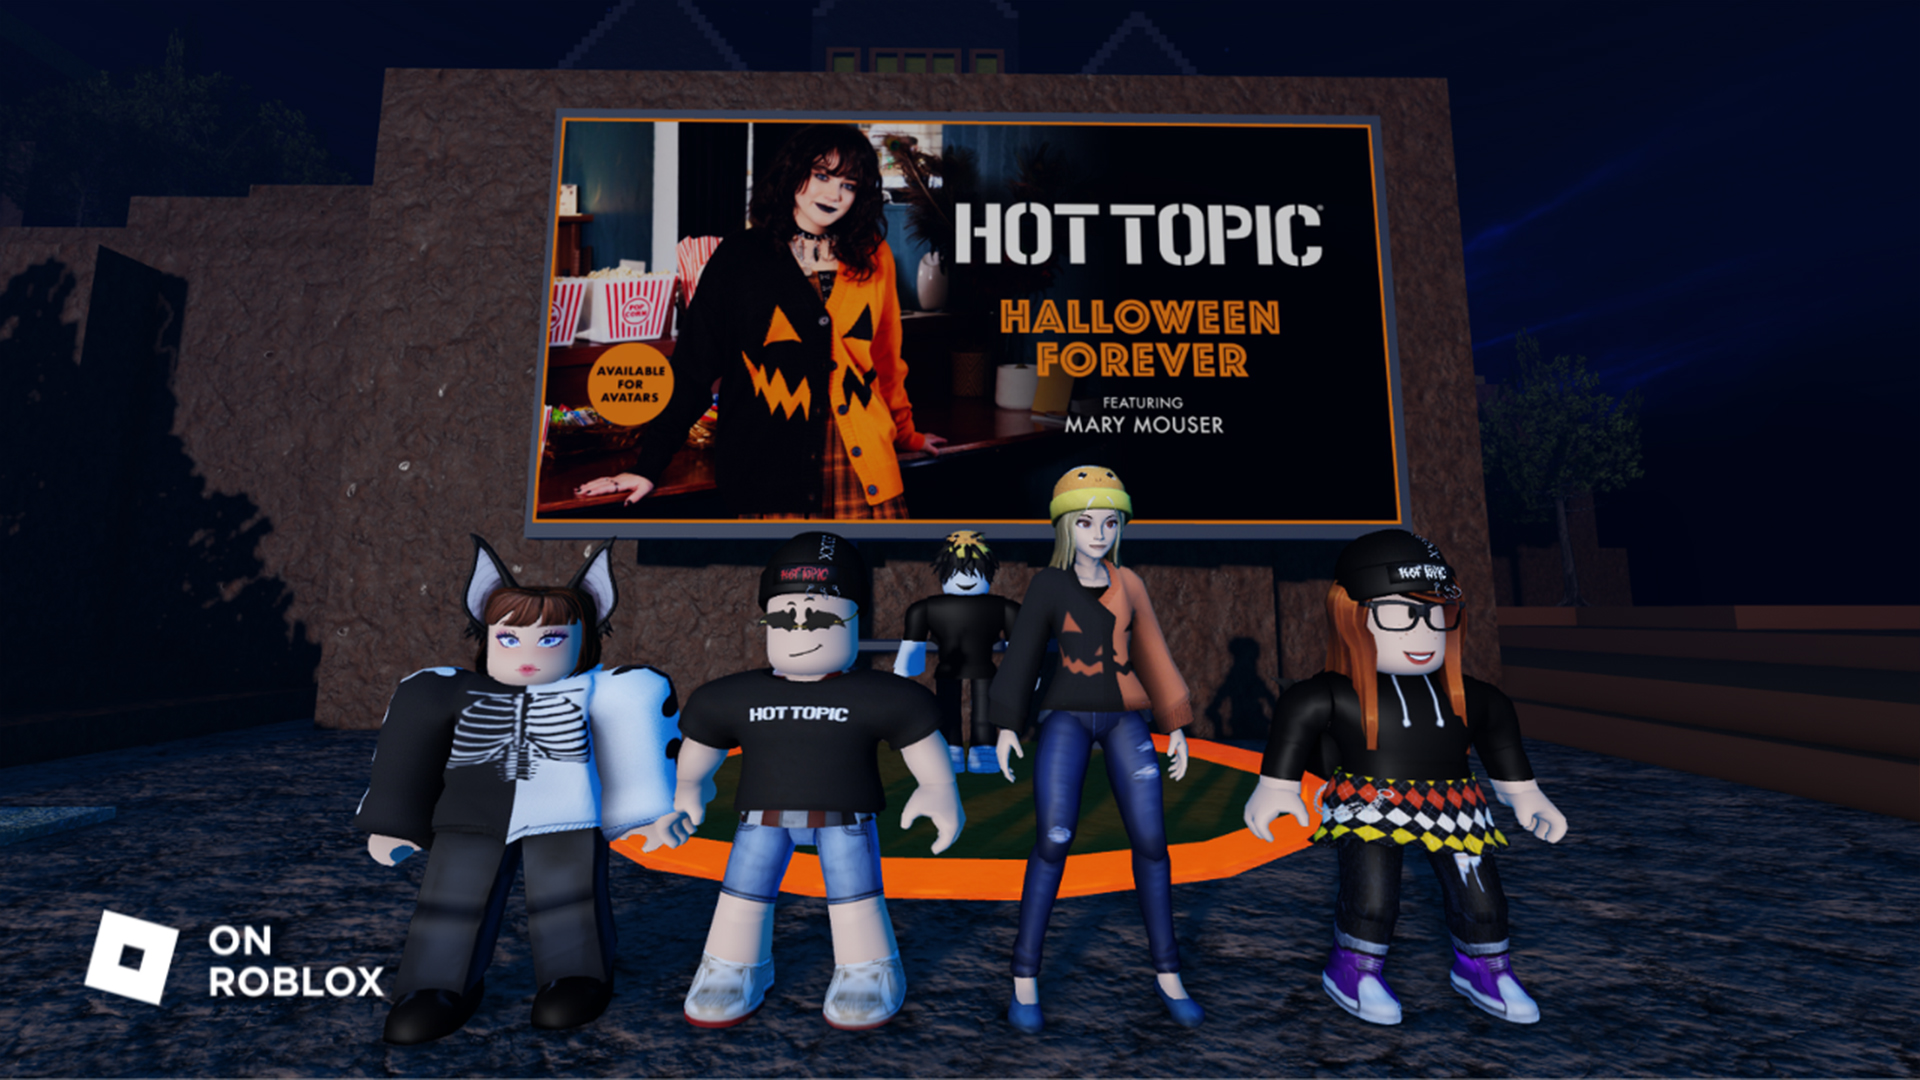 Brands are winning on Roblox with avatar fashion, gaming